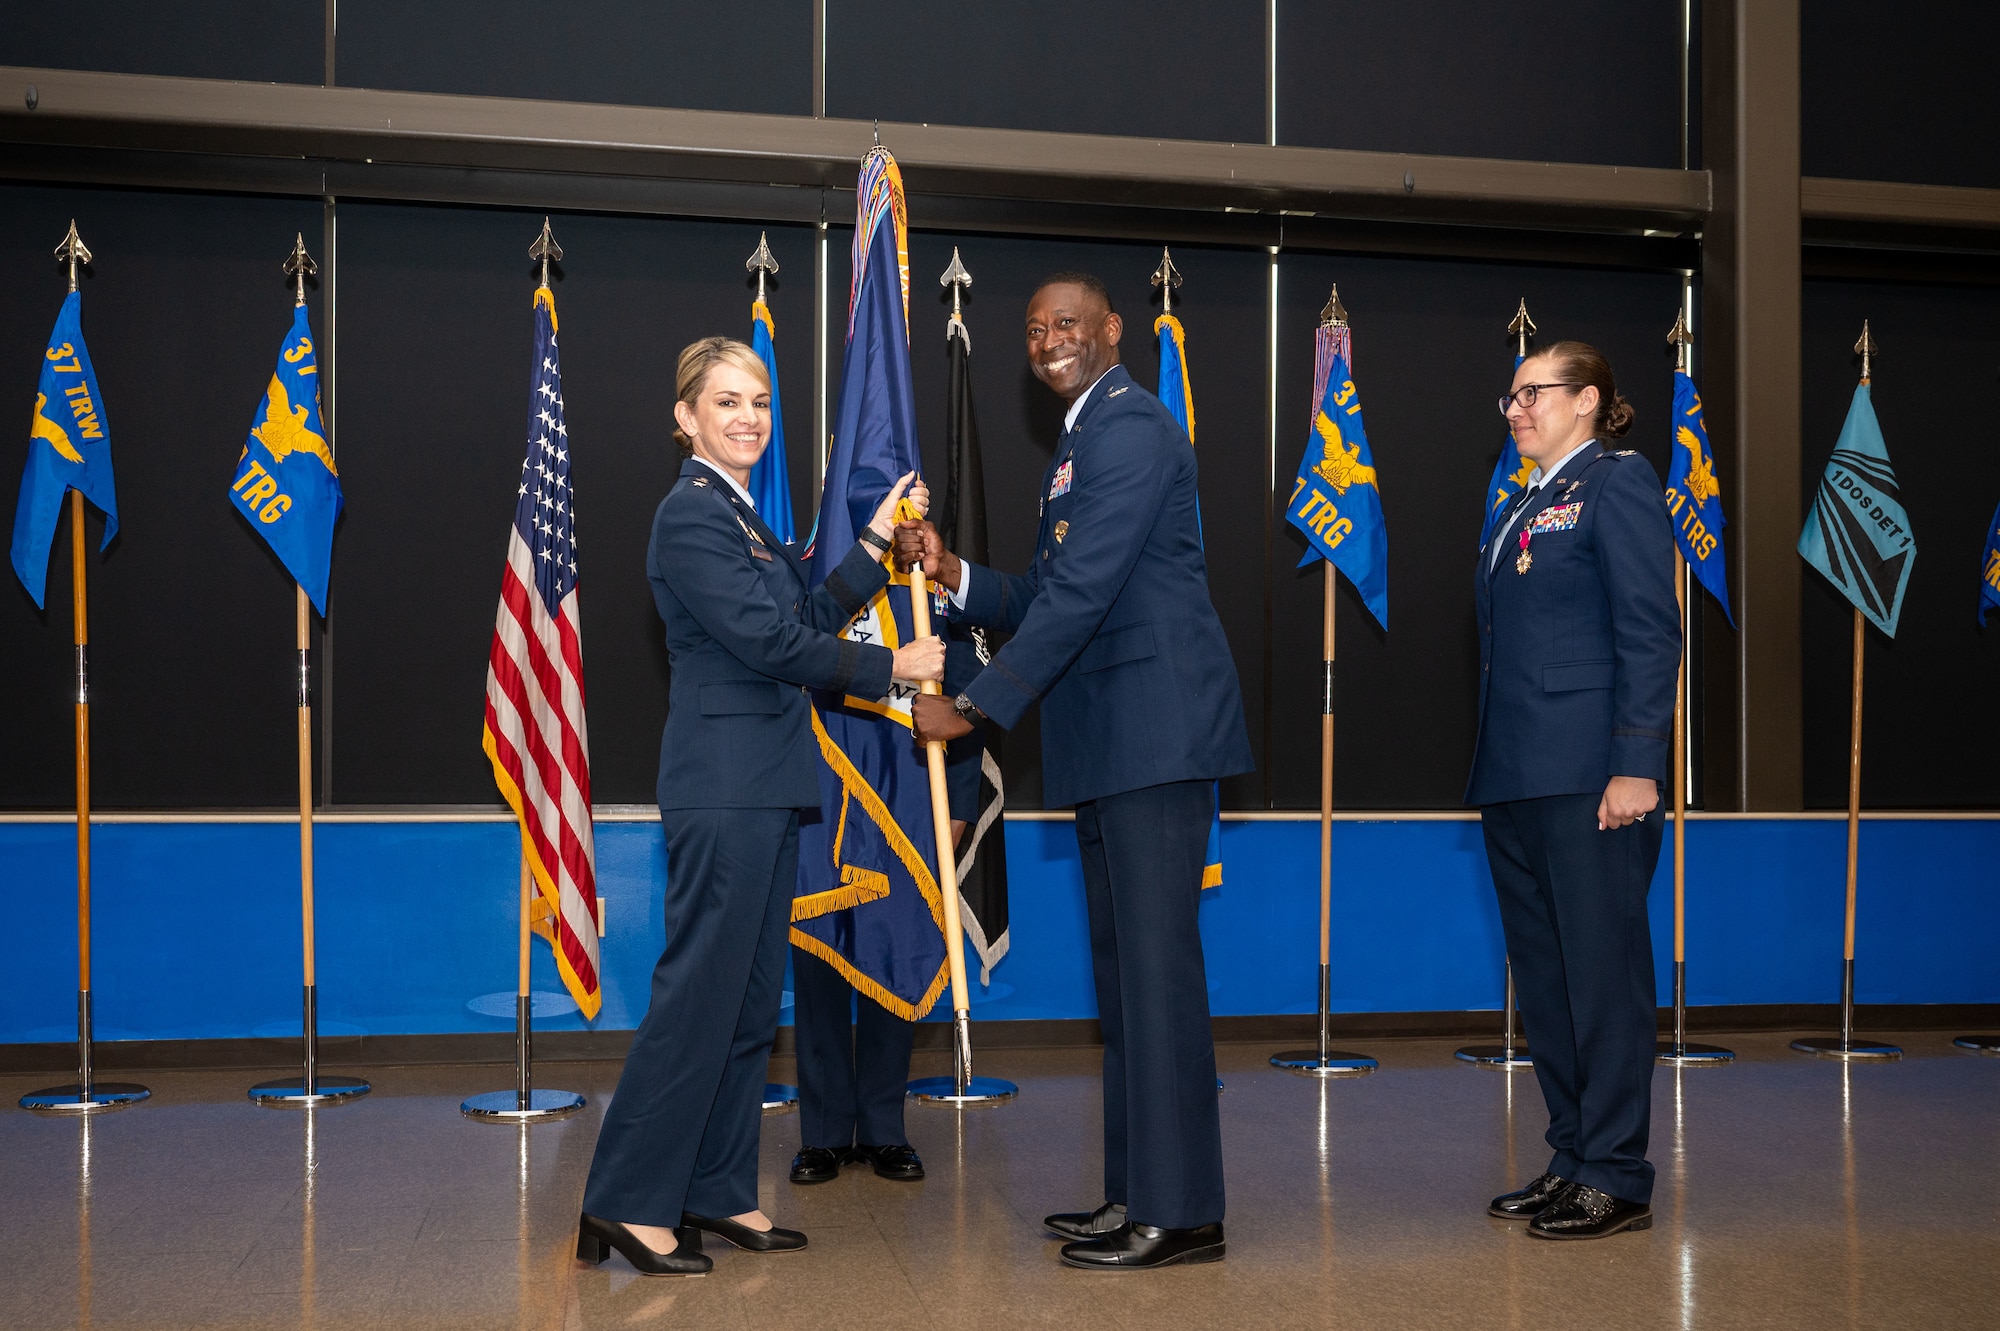 Col. Willie Cooper III assumes command of the 37th Training Wing from Maj. Gen. Michele Edmondson, 2nd Air Force commander, May 30 at Joint Base San Antonio-Lackland, Texas. Cooper was the former 375th Mission Support Group commander at Scott Air Force Base, Ill., and succeeded Col. Lauren Courchaine who will transition to a new role as the Senior Military Assistant to the Under Secretary of the Air Force at the Pentagon. (U.S. Air Force photo by Ava Leone)